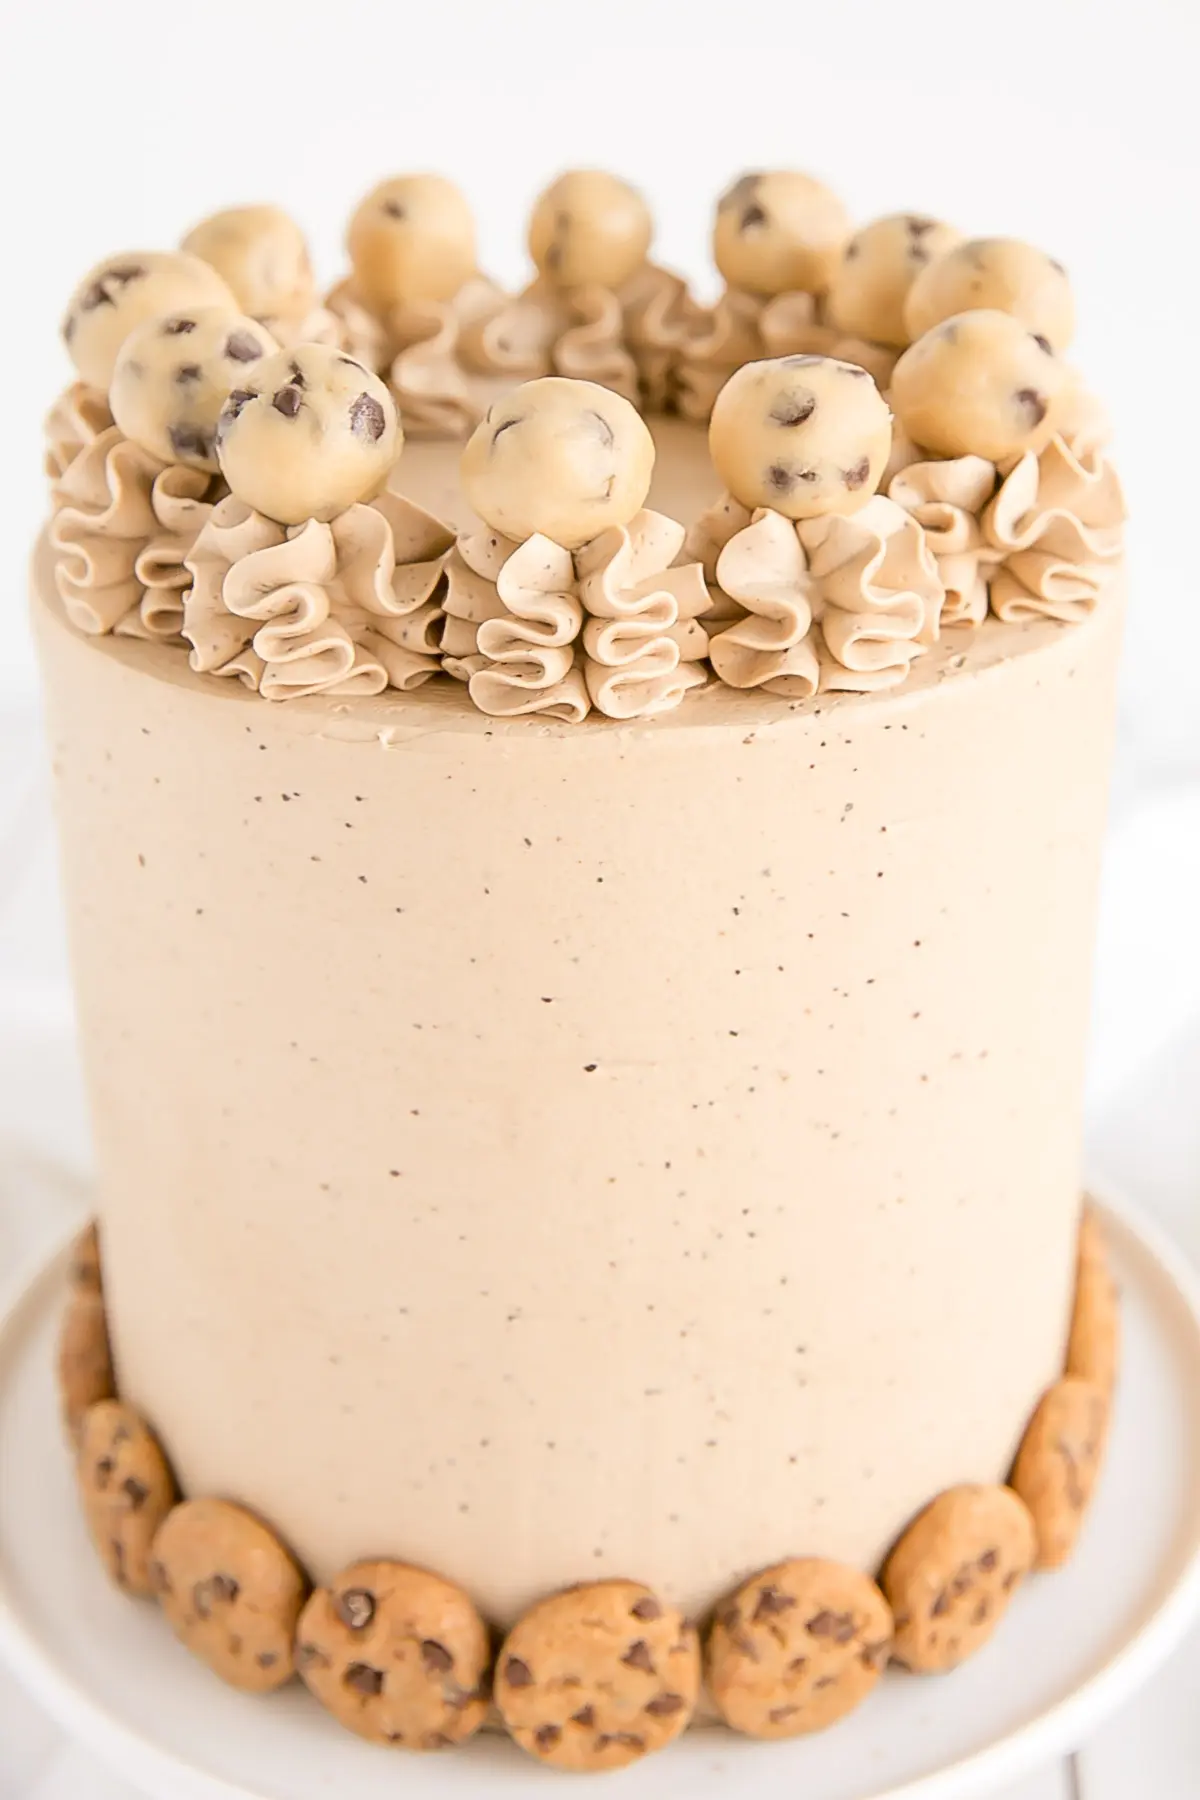 Chocolate Chip Cookie frosting, chocolate chip cake layers, and cookie dough filling.